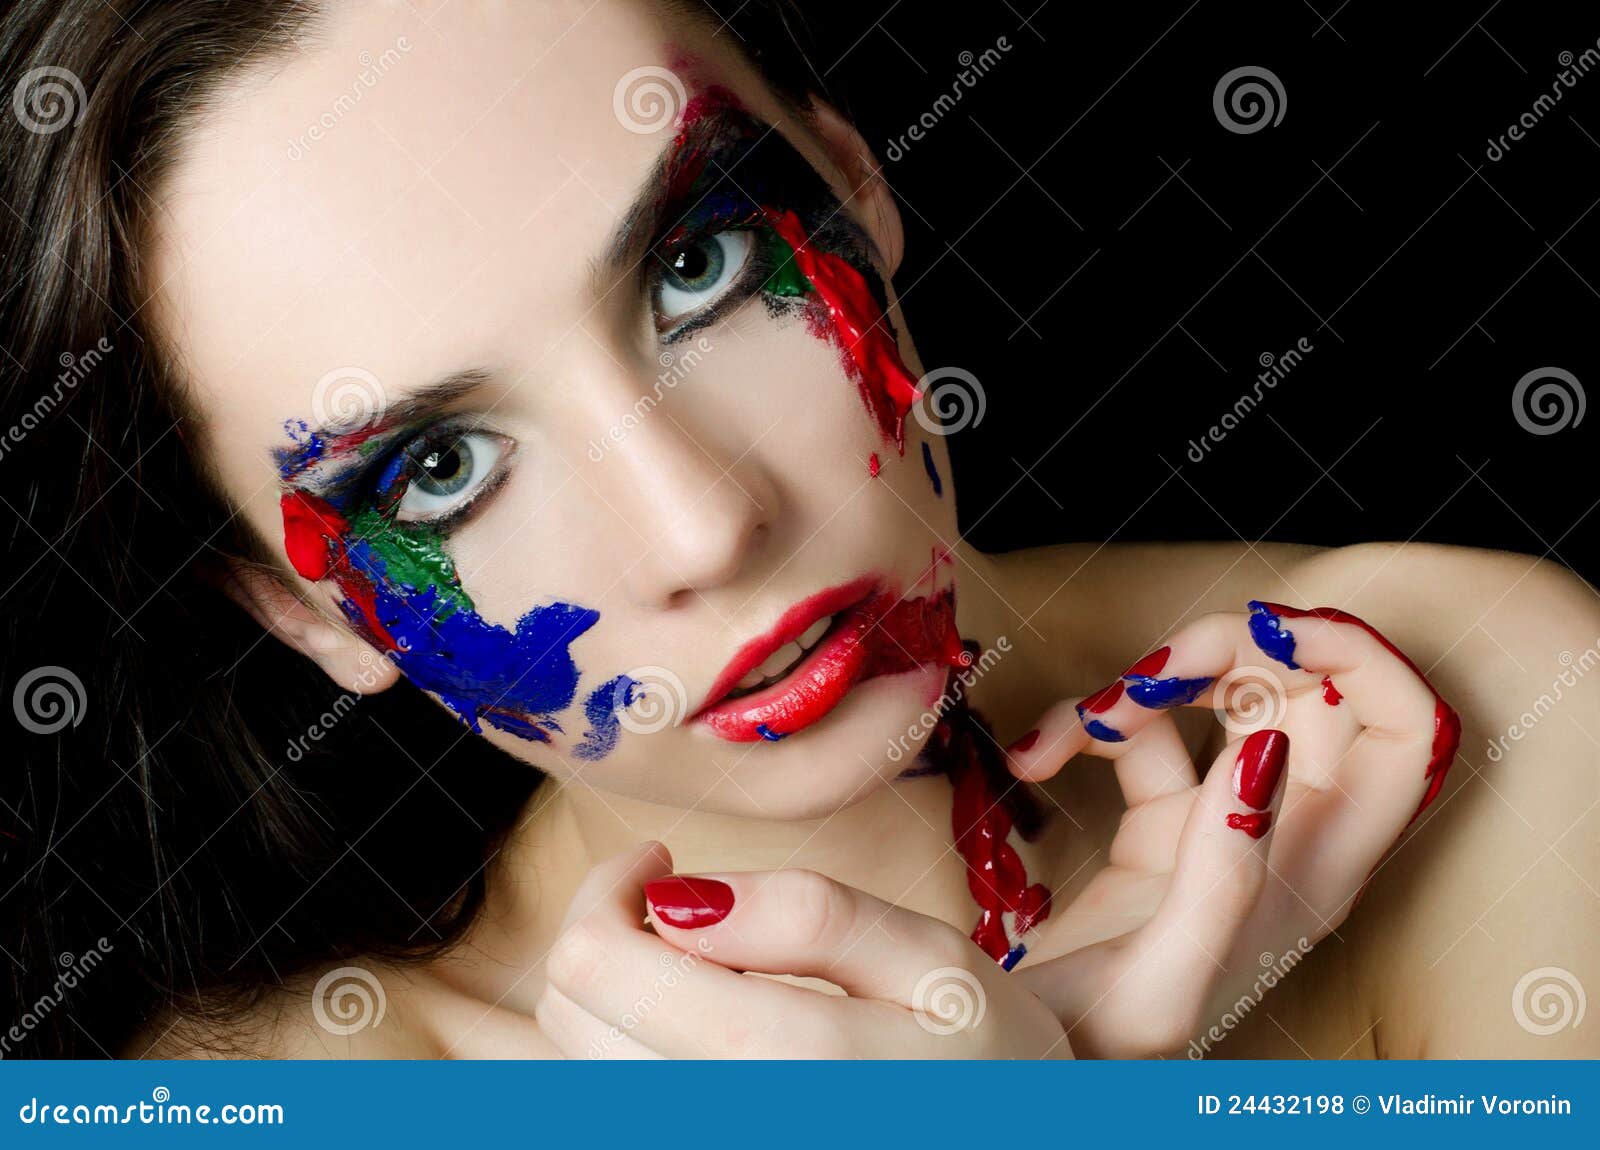 A Person with Red and Black Face Paint · Free Stock Photo